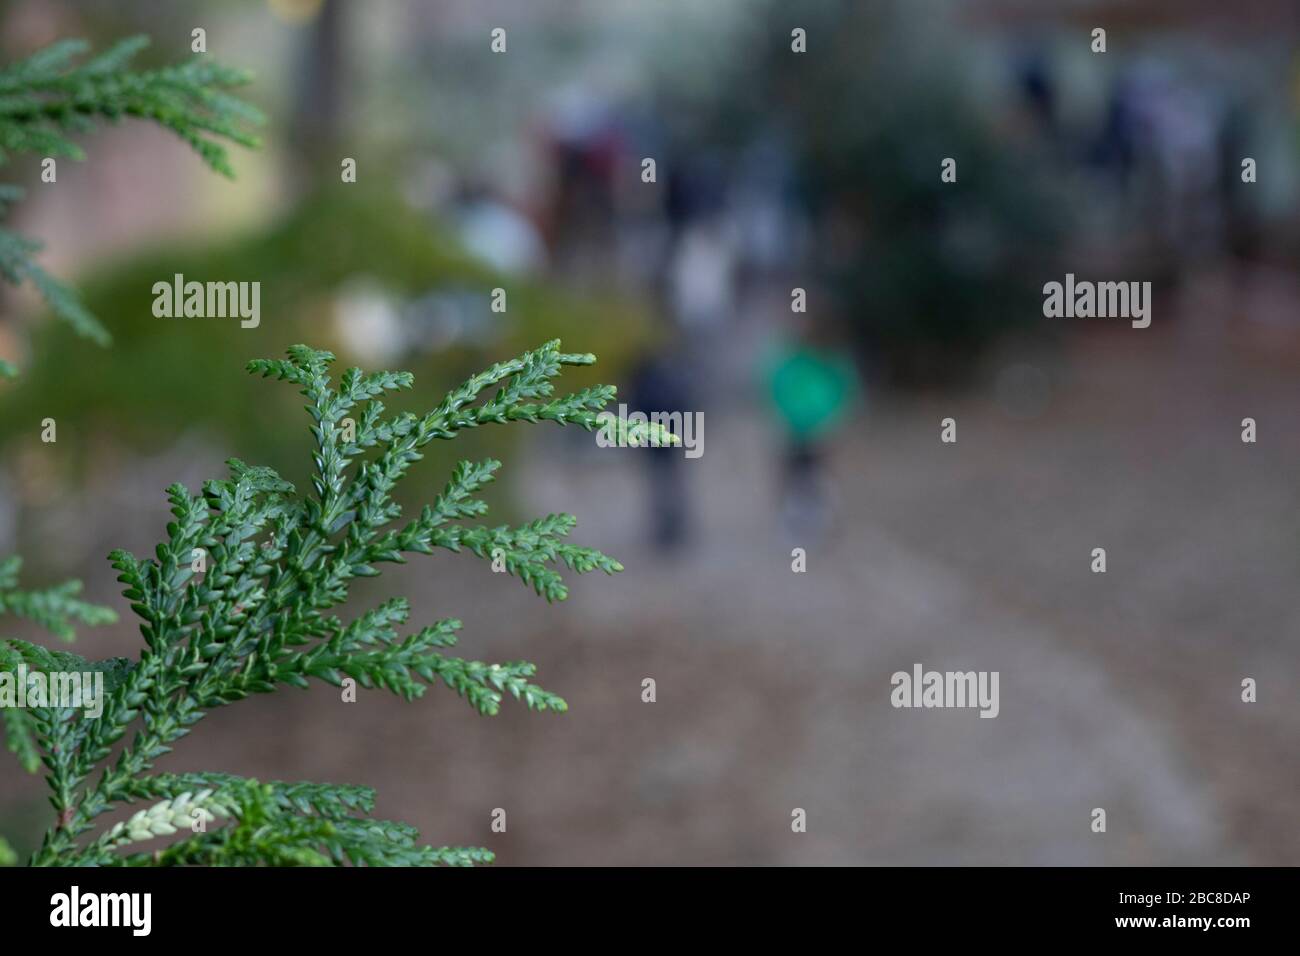 The leaves of the tree with the Latin name thujopsis closet. Close-up. In the background, people are walking in the park. Stock Photo